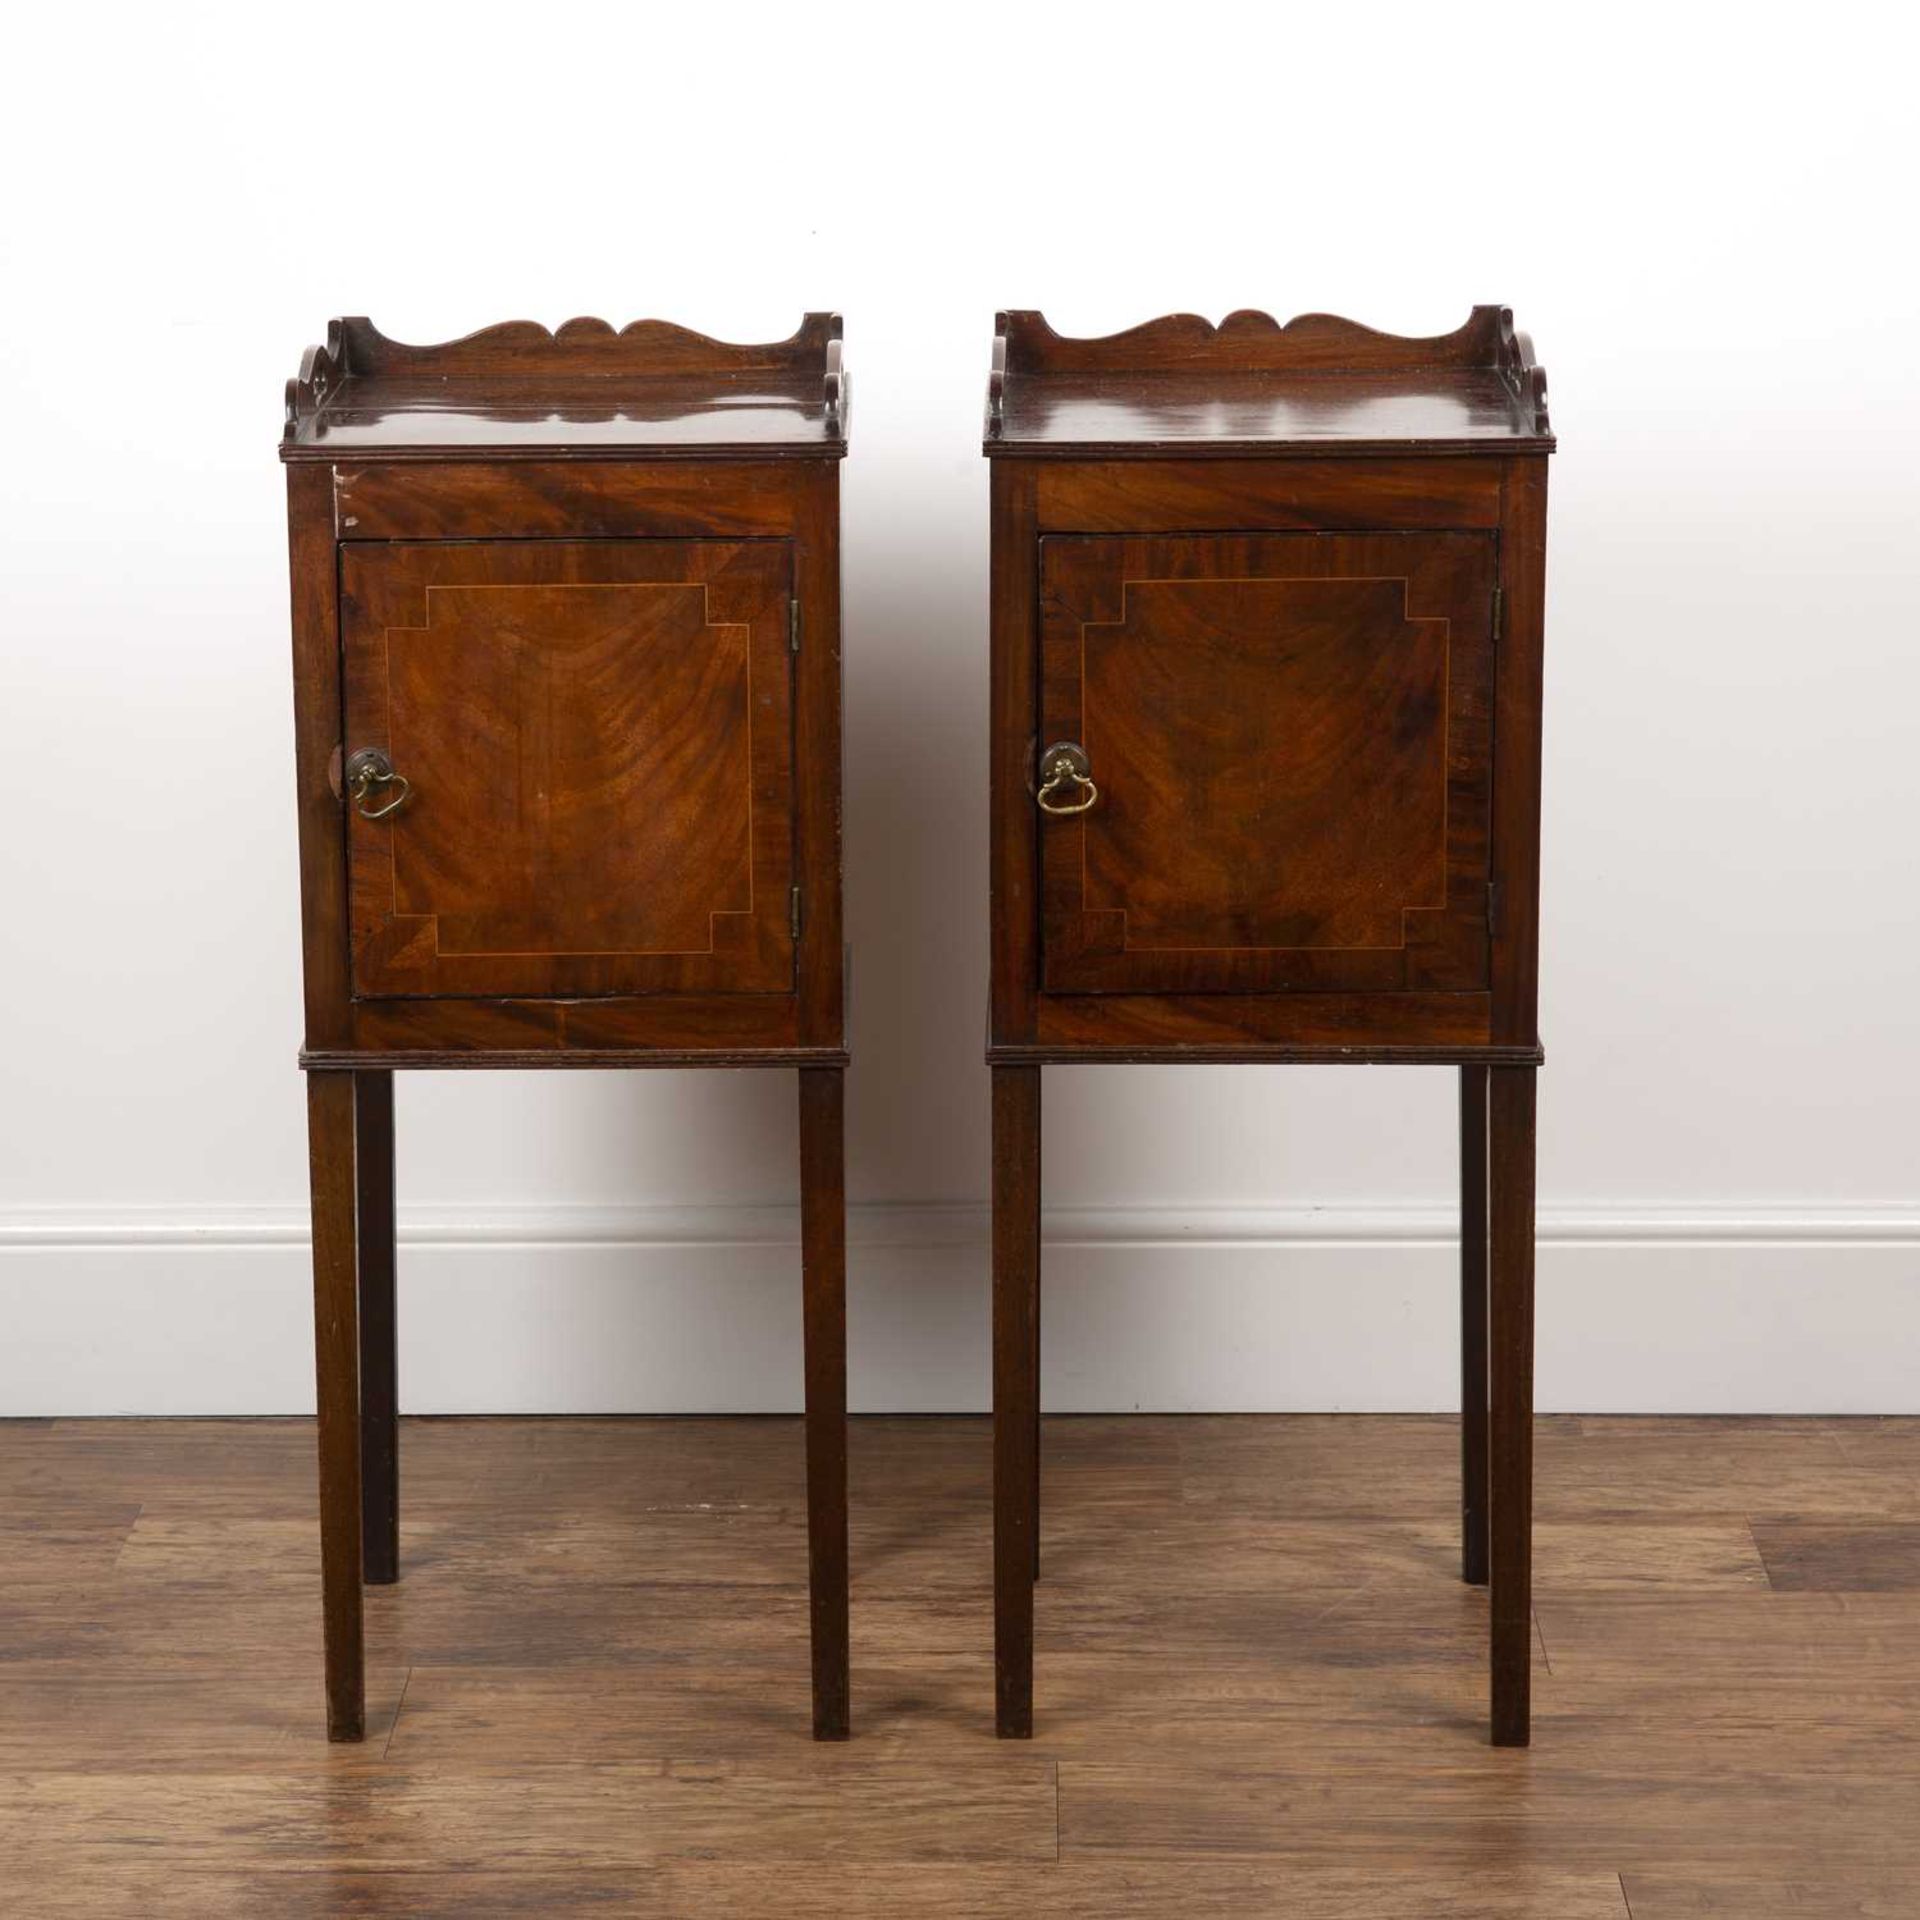 Pair of mahogany and inlaid tray top bedside cupboards 19th Century, each with a panel door with